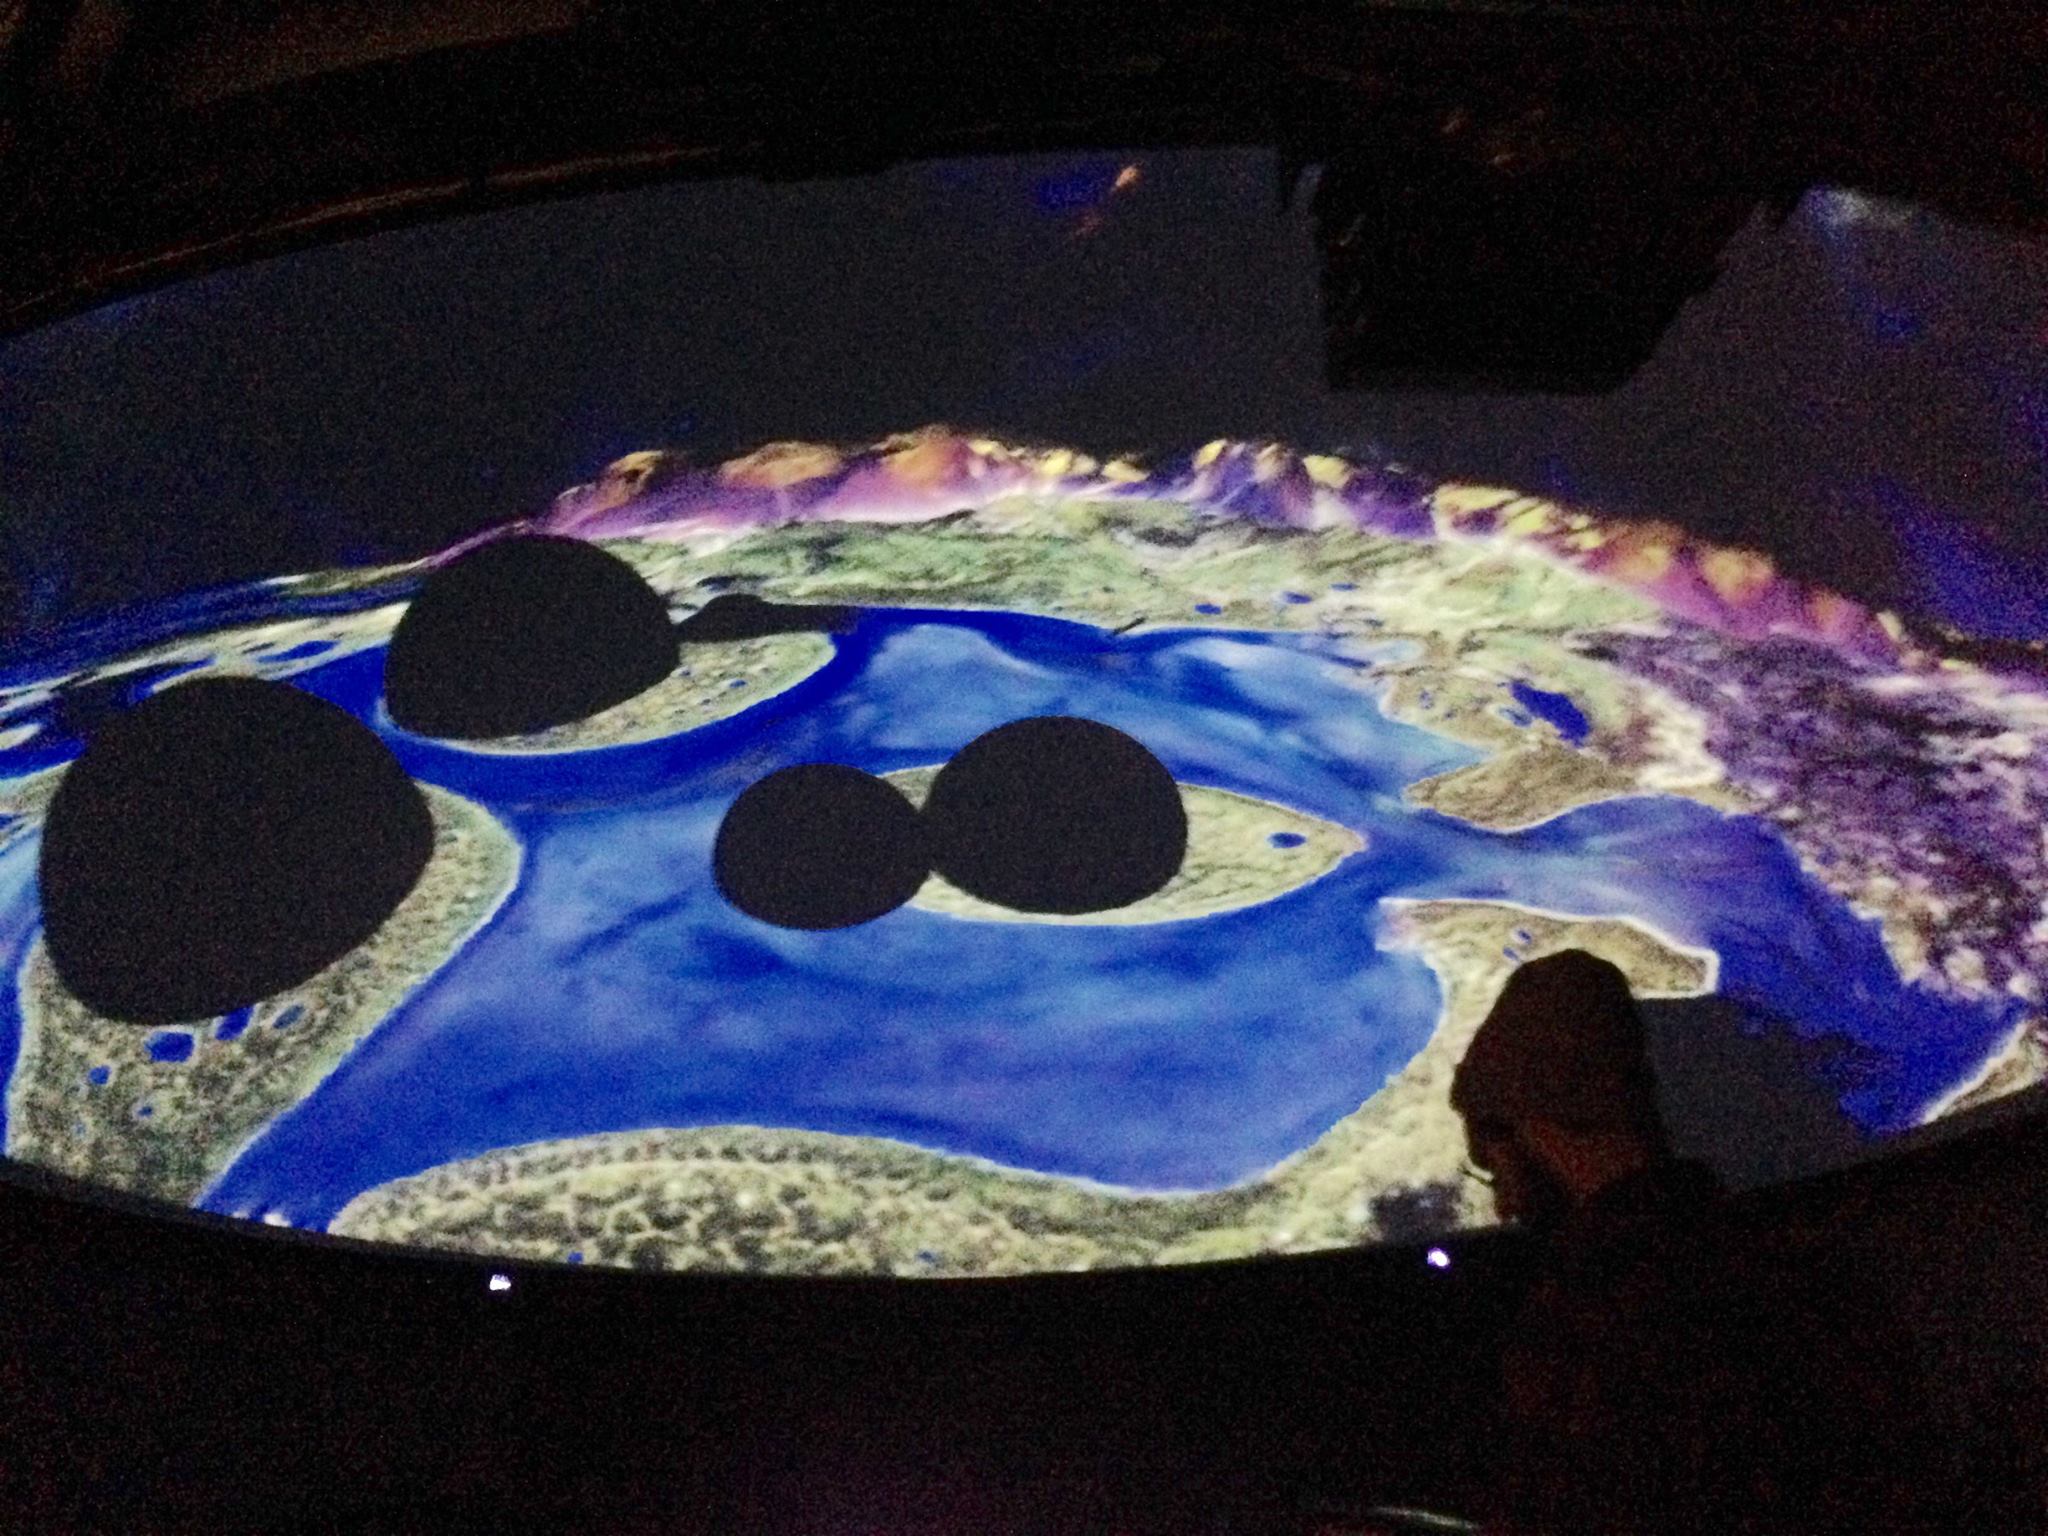 Digital Dome Interactive Gaming Art is Here